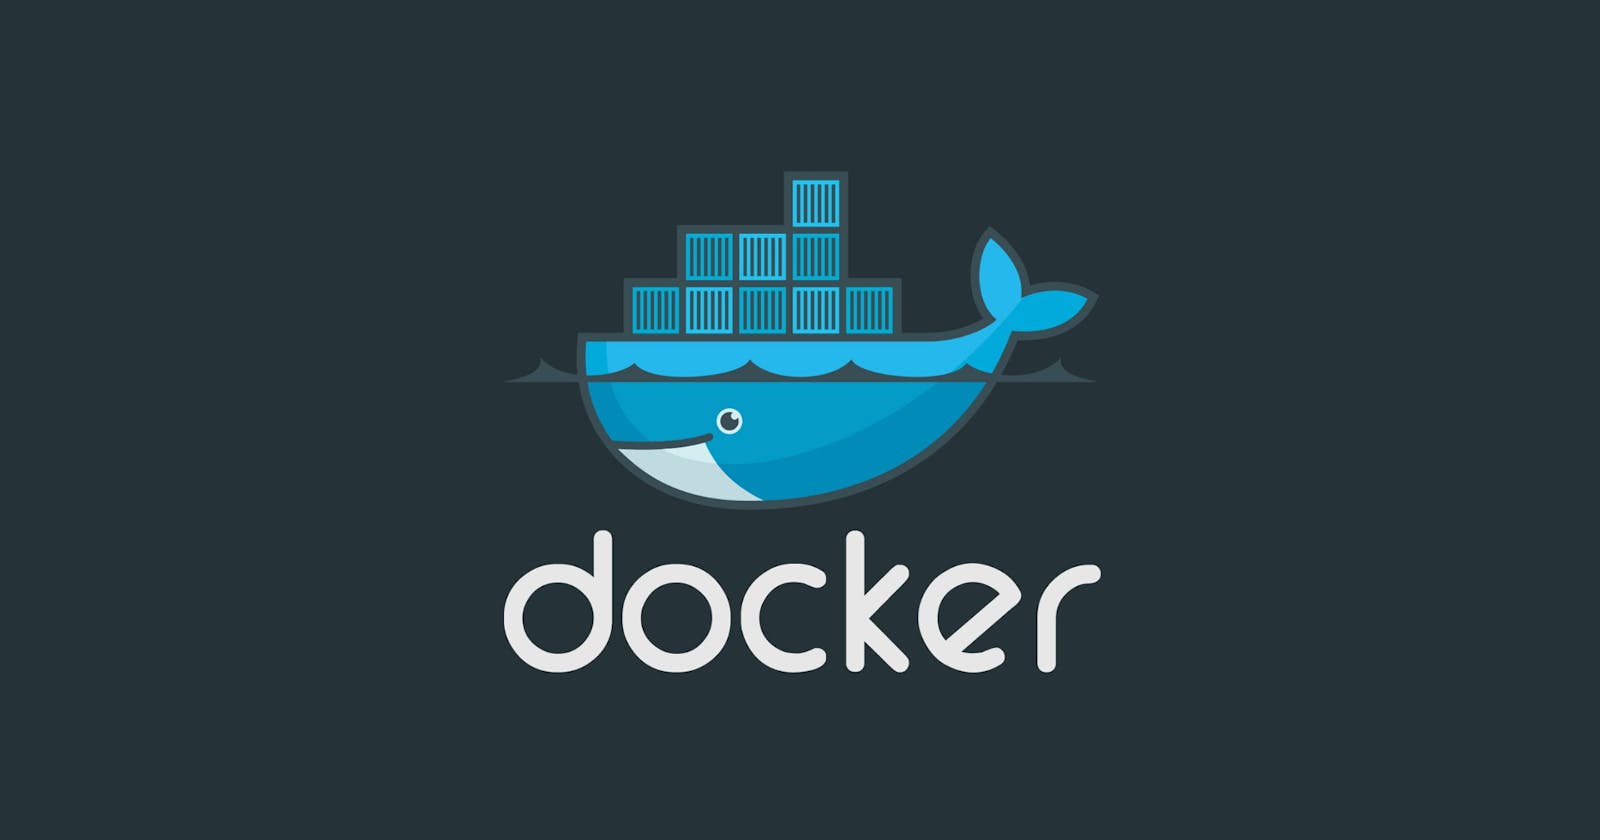 All About Docker